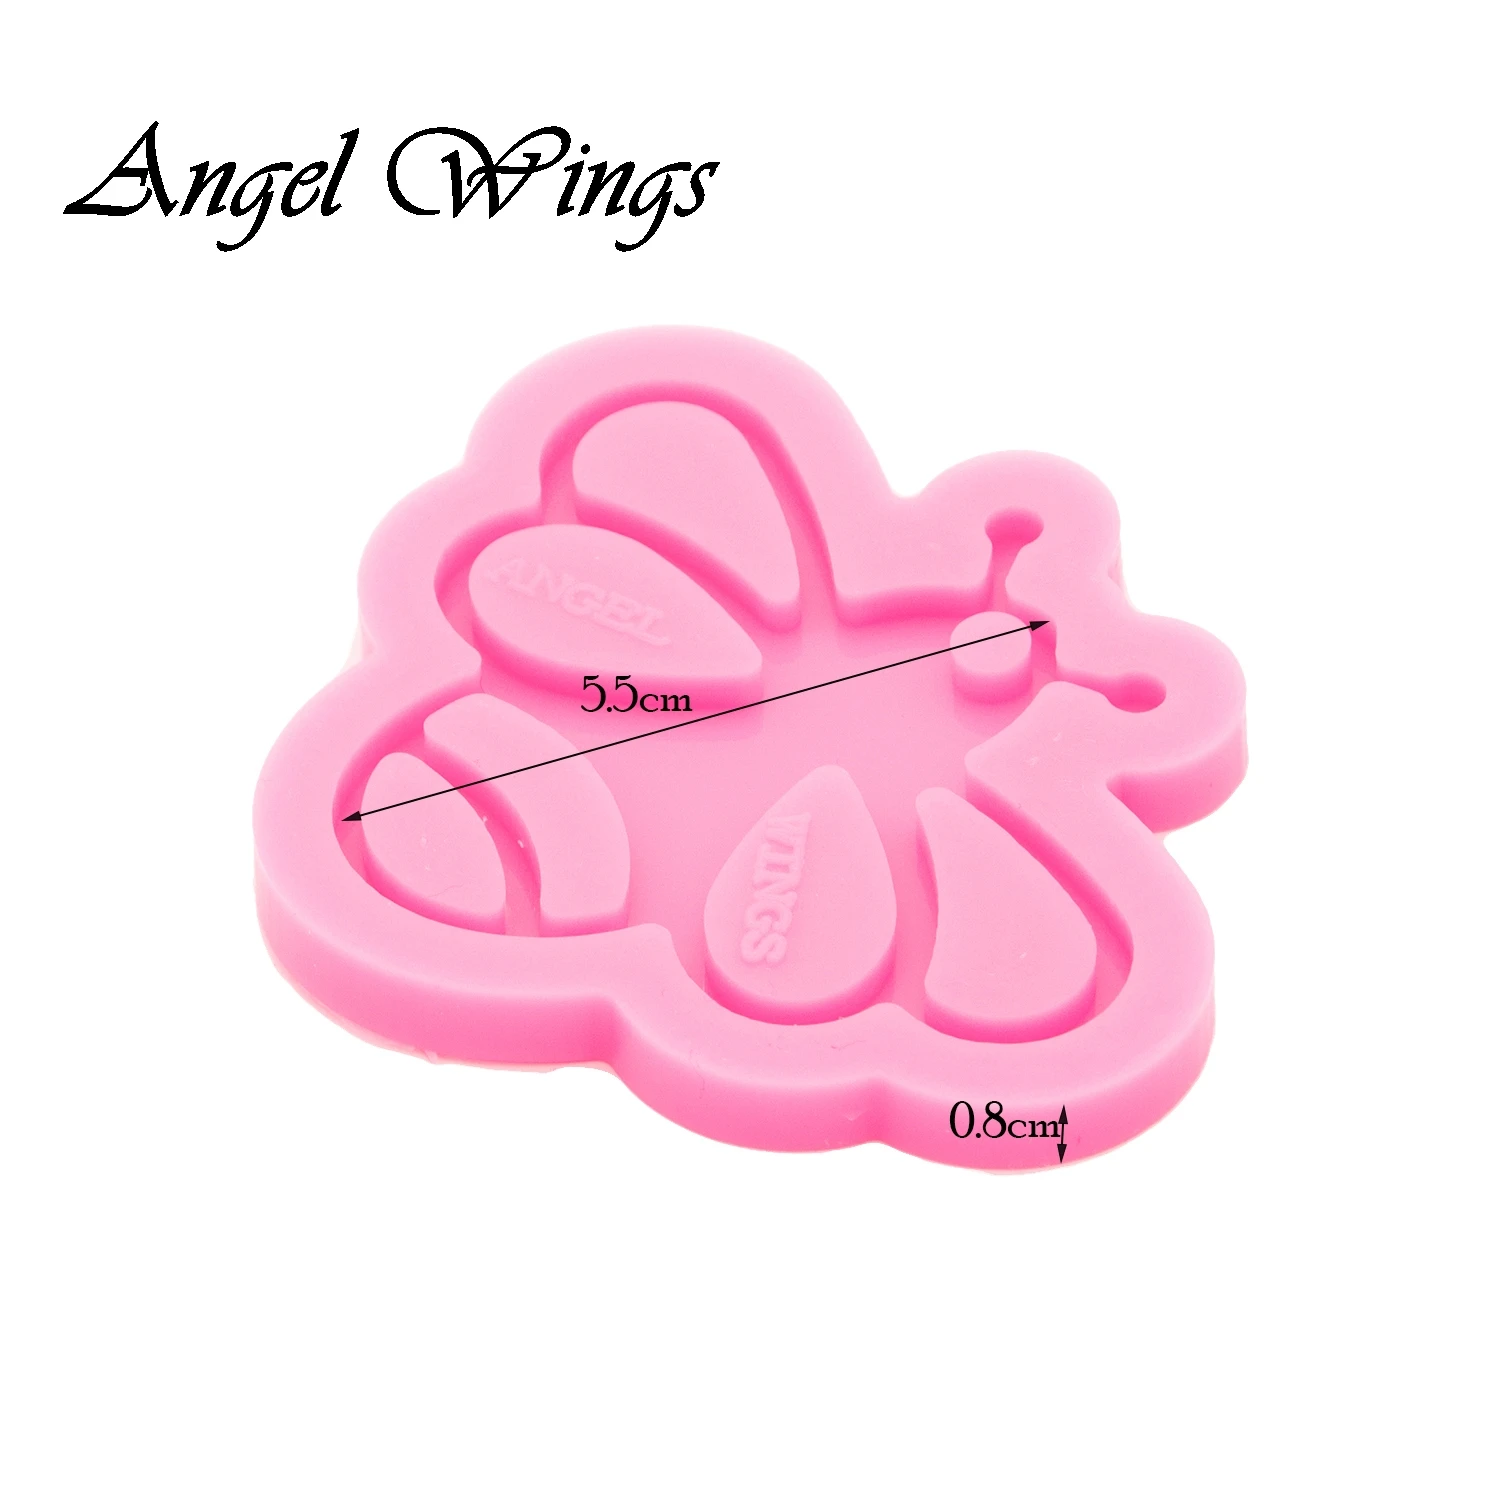 Angel Wings Super Glossy Bee Honeycomb Shape Keychain Silicone Mold Resin Craft Silicone Mould DIY Necklace Pendant Jewellery Making Mold